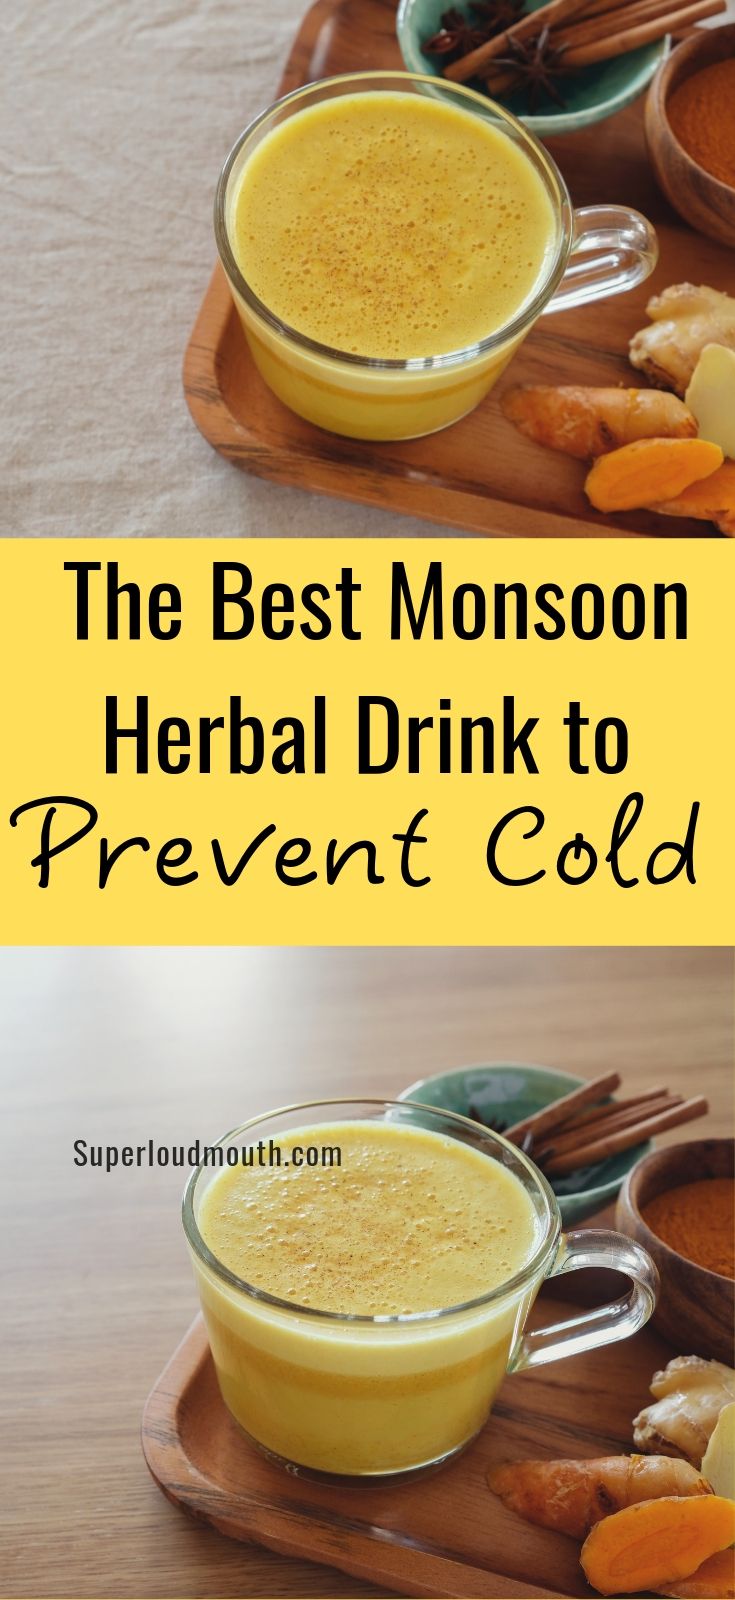 The Best Monsoon Herbal Drink to prevent cold